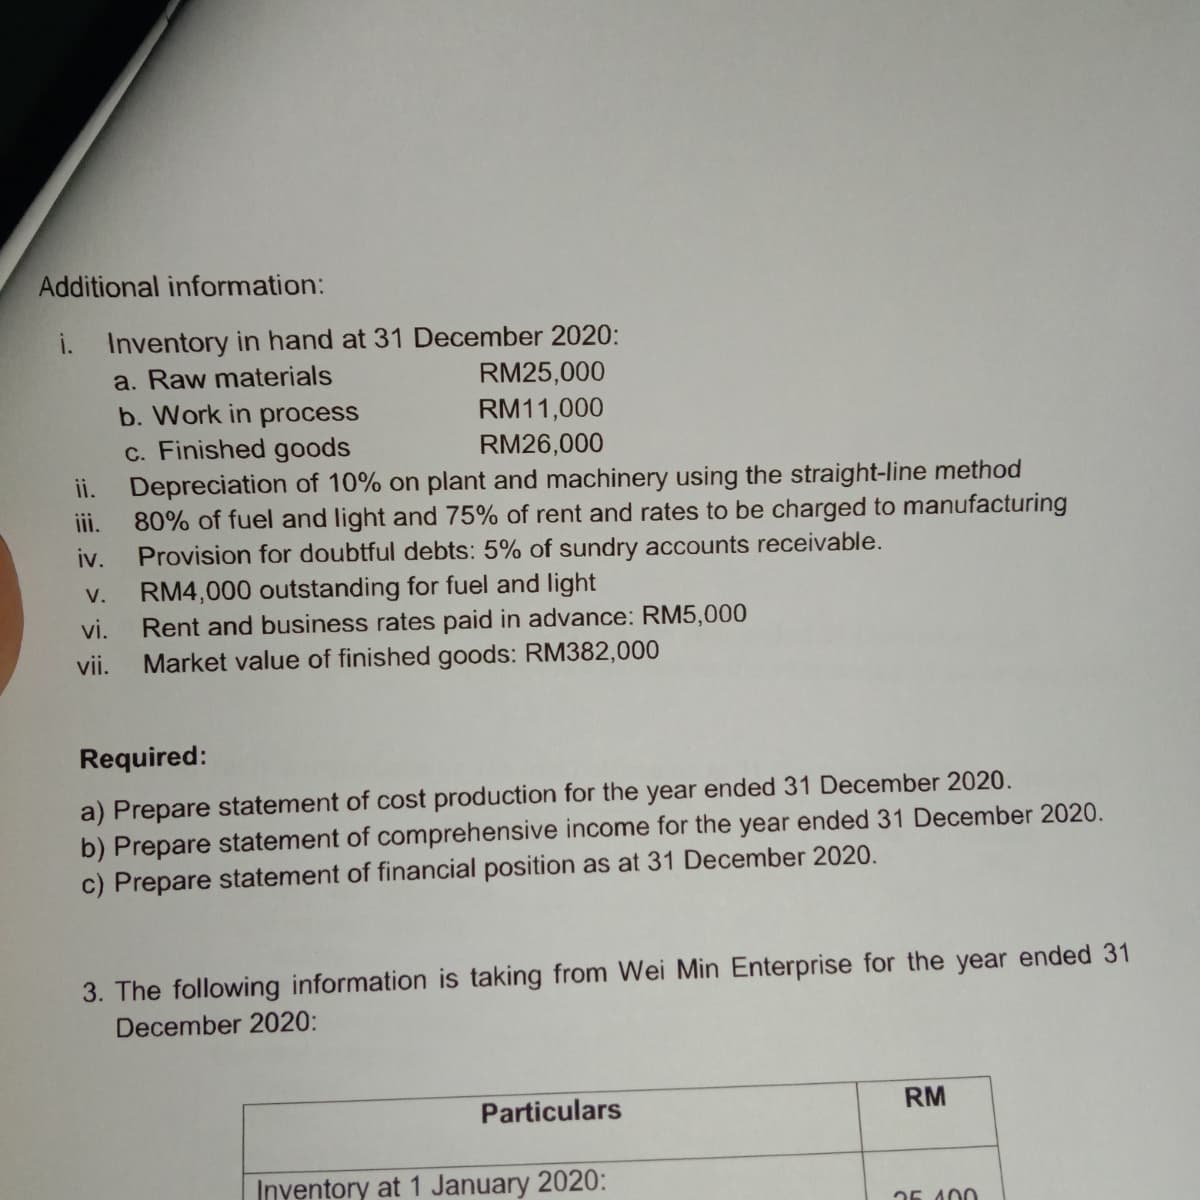 Additional information:
i. Inventory in hand at 31 December 2020:
a. Raw materials
RM25,000
RM11,000
b. Work in process
c. Finished goods
ii. Depreciation of 10% on plant and machinery using the straight-line method
iii.
RM26,000
80% of fuel and light and 75% of rent and rates to be charged to manufacturing
Provision for doubtful debts: 5% of sundry accounts receivable.
iv.
RM4,000 outstanding for fuel and light
Rent and business rates paid in advance: RM5,000
Market value of finished goods: RM382,000
V.
vi.
vii.
Required:
a) Prepare statement of cost production for the year ended 31 December 2020.
b) Prepare statement of comprehensive income for the year ended 31 December 2020.
c) Prepare statement of financial position as at 31 December 2020.
3. The following information is taking from Wei Min Enterprise for the year ended 31
December 2020:
Particulars
RM
Inyentory at 1 January 2020:
25 400
